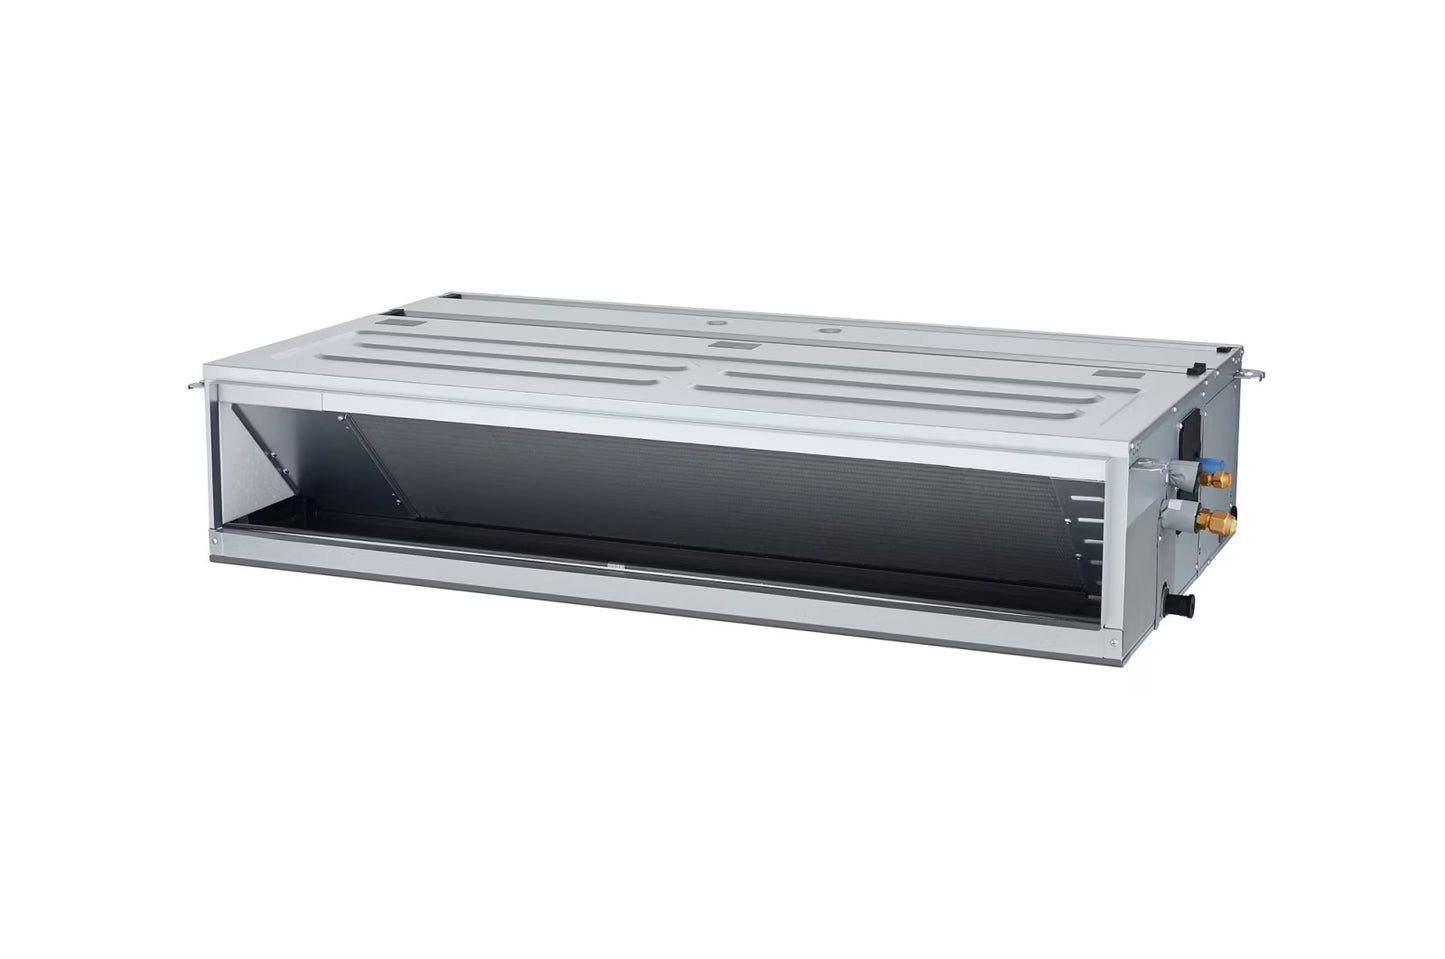 LG Ceiling Concealed Duct INV Unit 22.4KW with High Static and E.S.P. Control for Multiple Rooms - ARNU76GB8A2